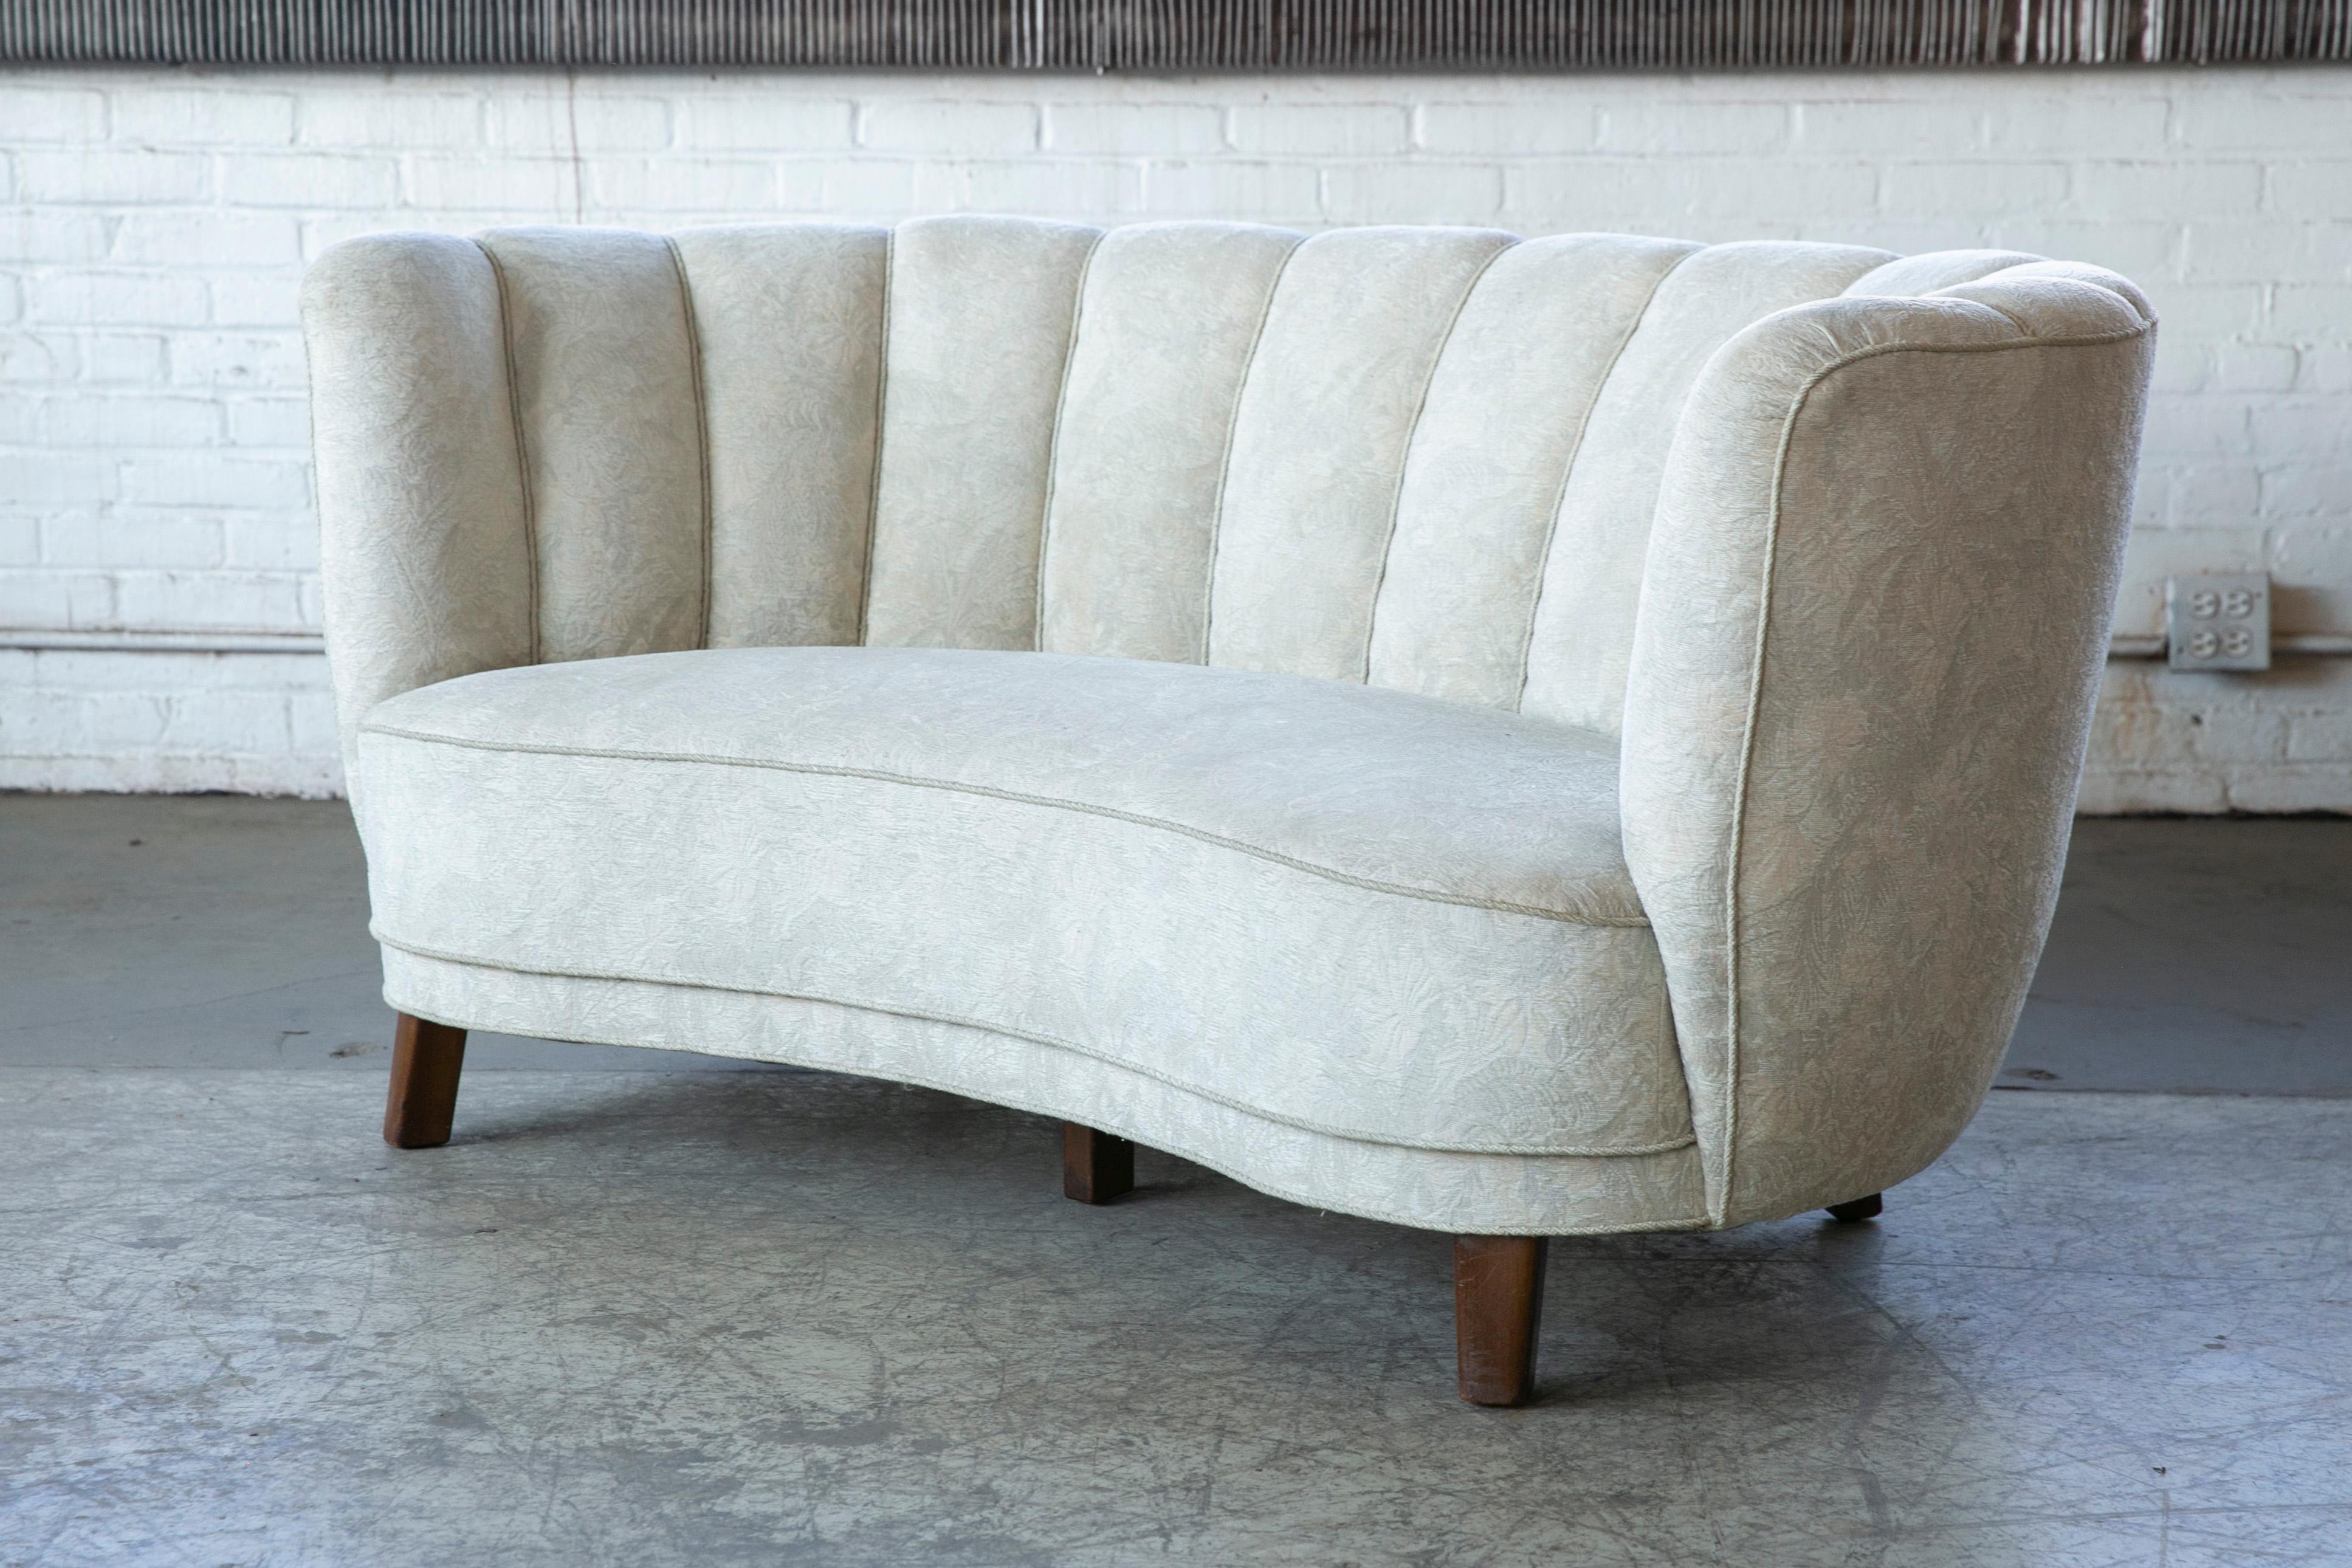 Viggo Boesen style banana shaped or curved Loveseat made in Denmark, circa 1940. This small sofa will make a strong statement in any room. Beautiful round voluptuous lines and with large block legs. Re-upholstered at a later point in a whitish